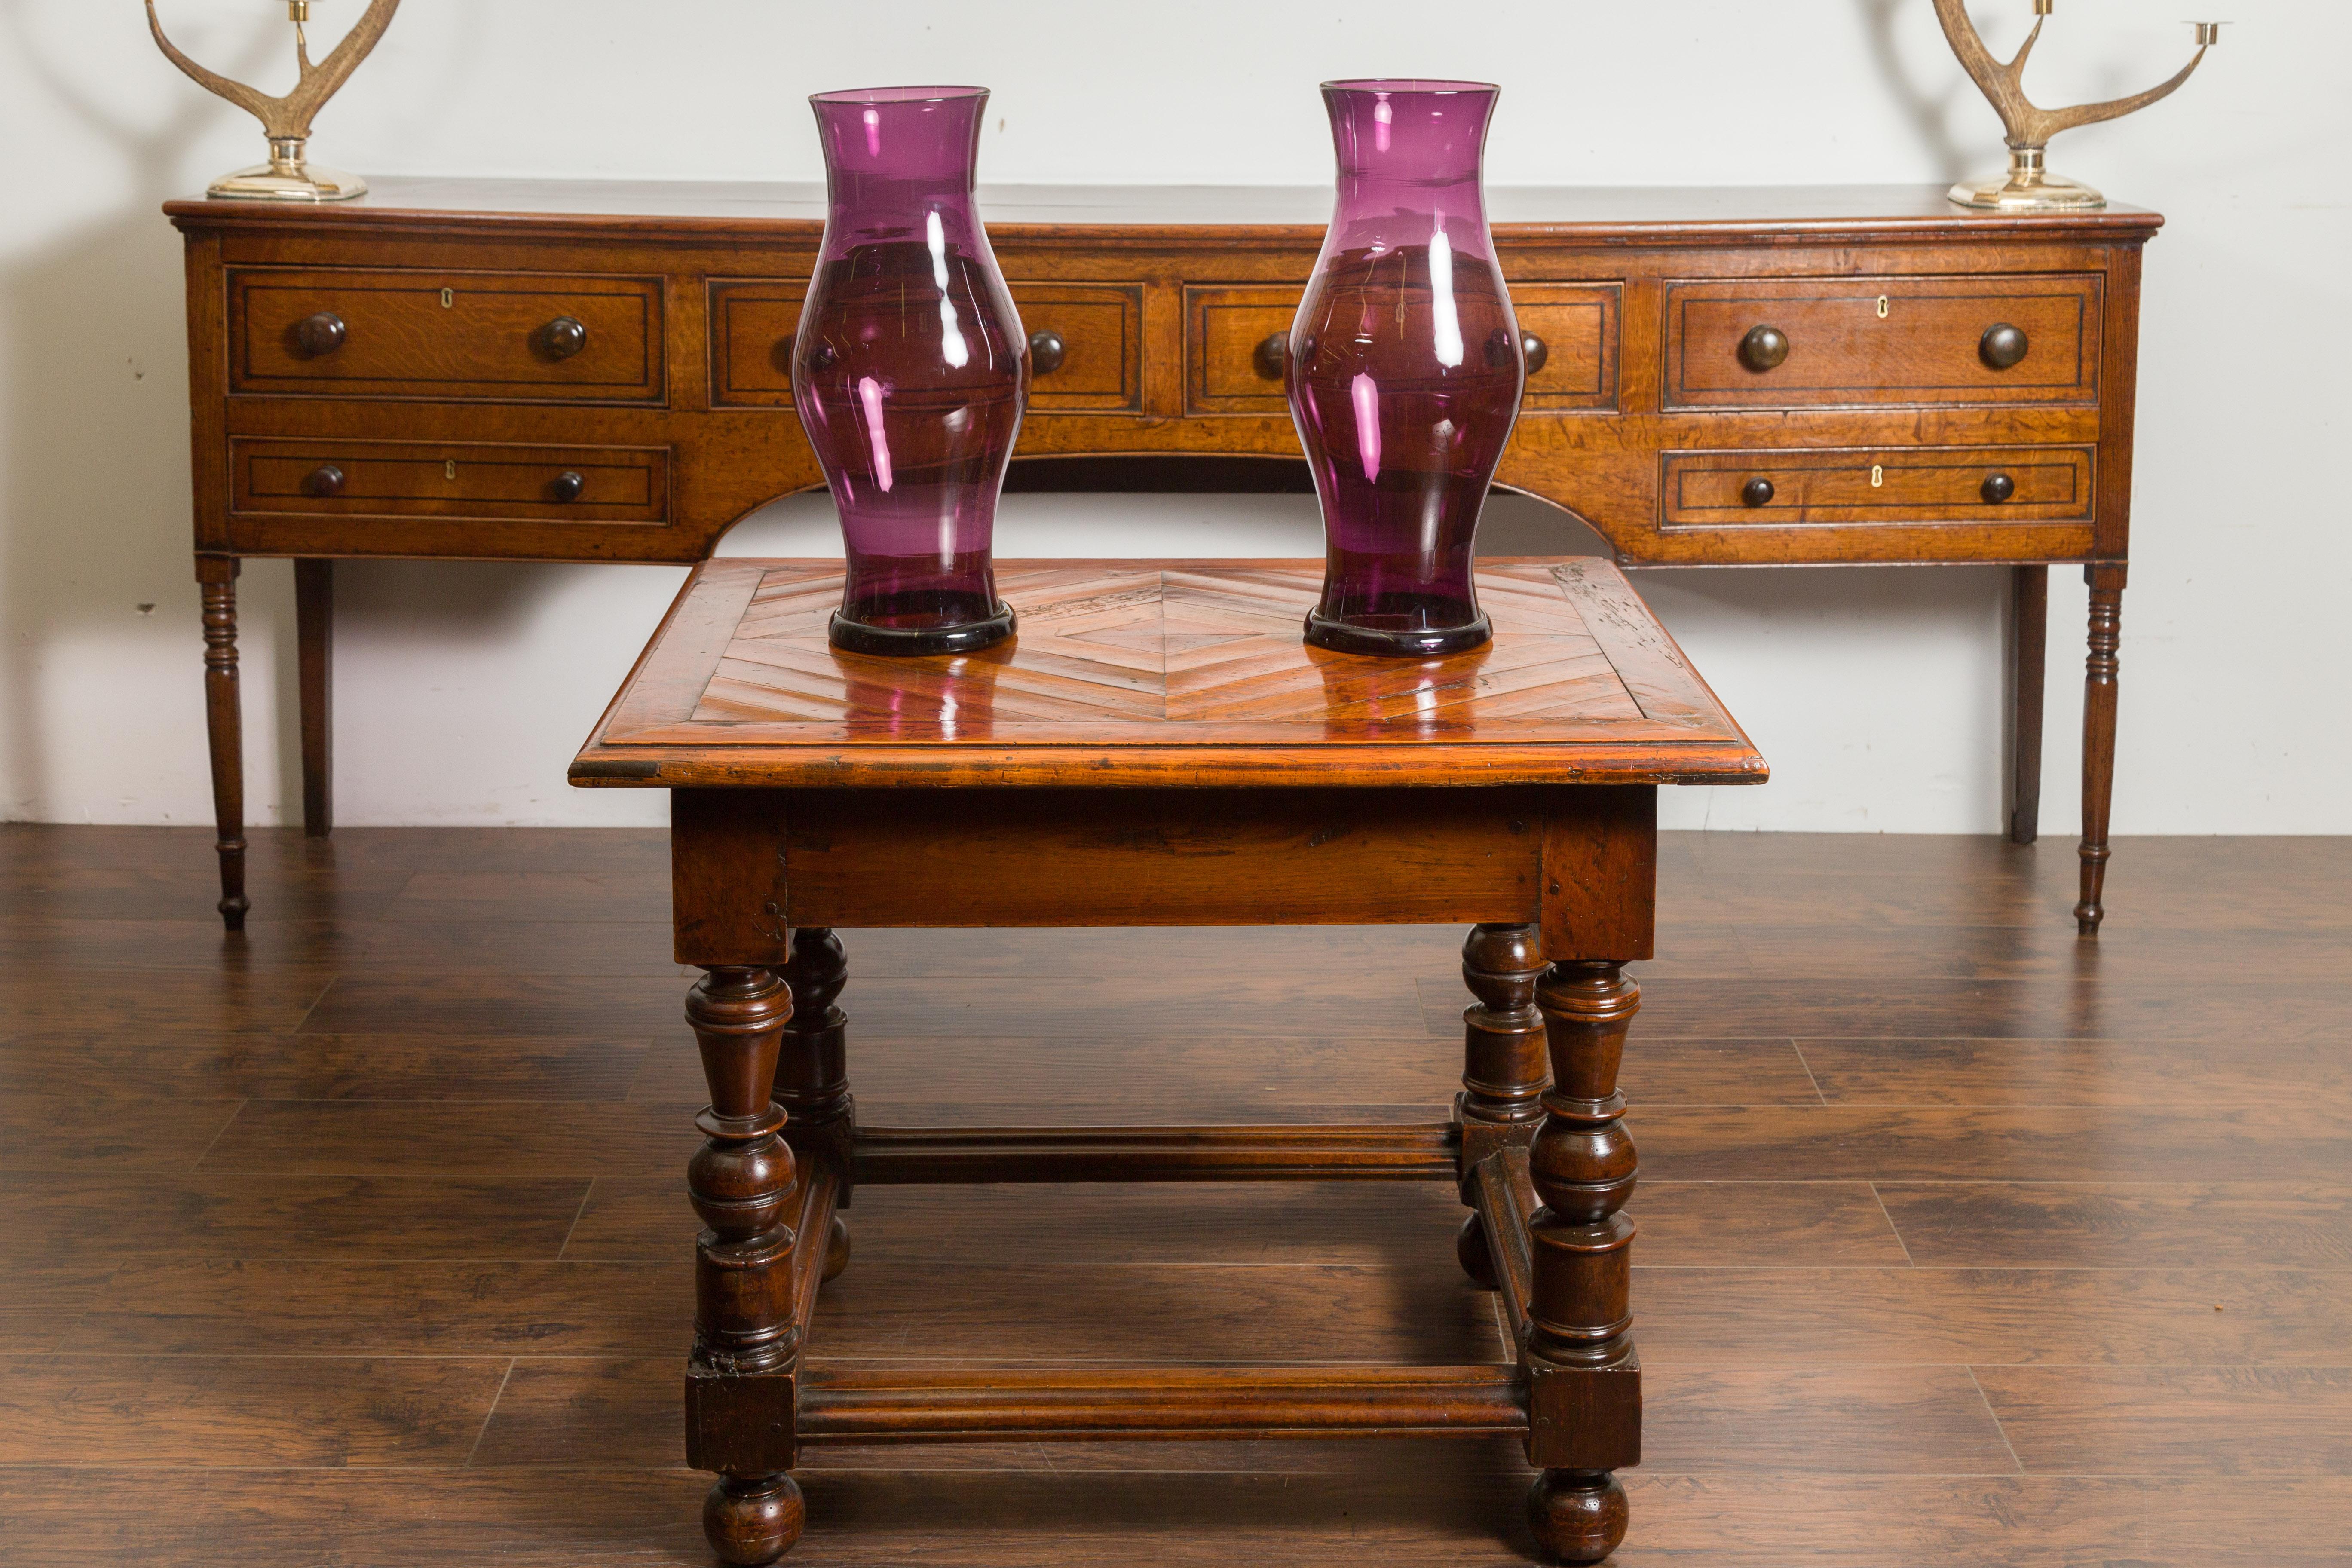 Pair of Amethyst Colored Glass Hurricanes from the Midcentury Period 1